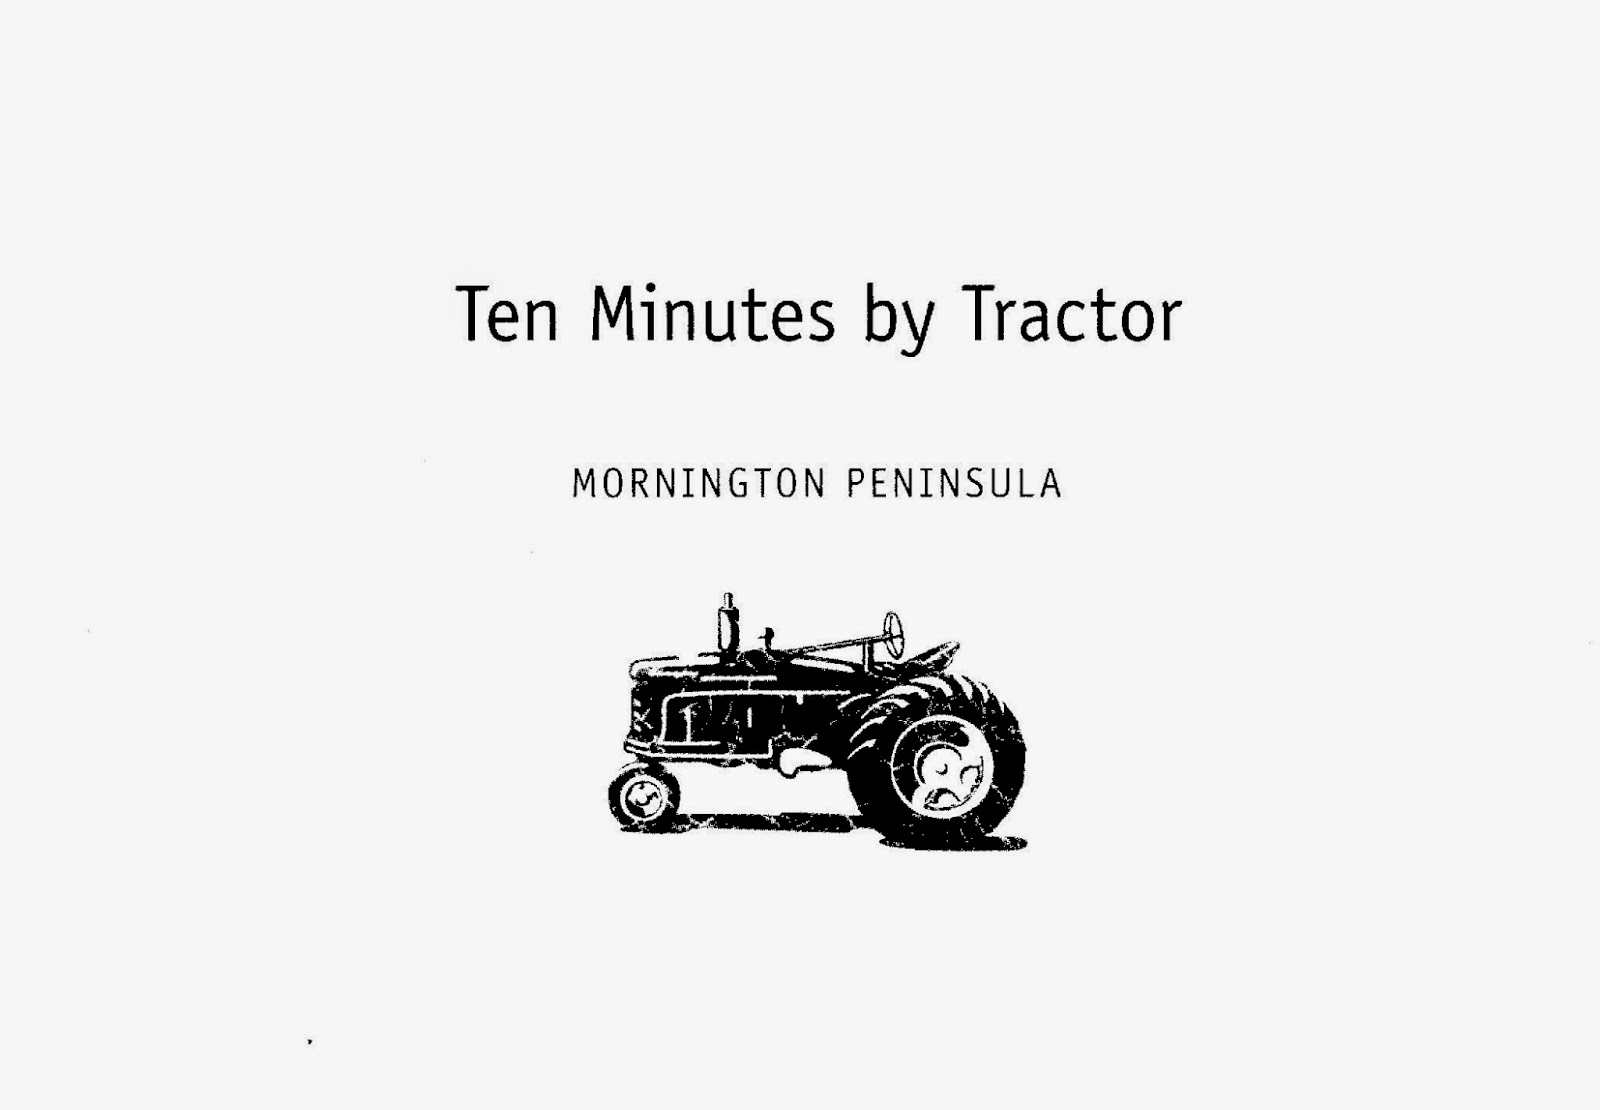 wine-food-and-other-pleasures-ten-minutes-by-tractor-australia-s-answer-to-grand-cru-burgundy